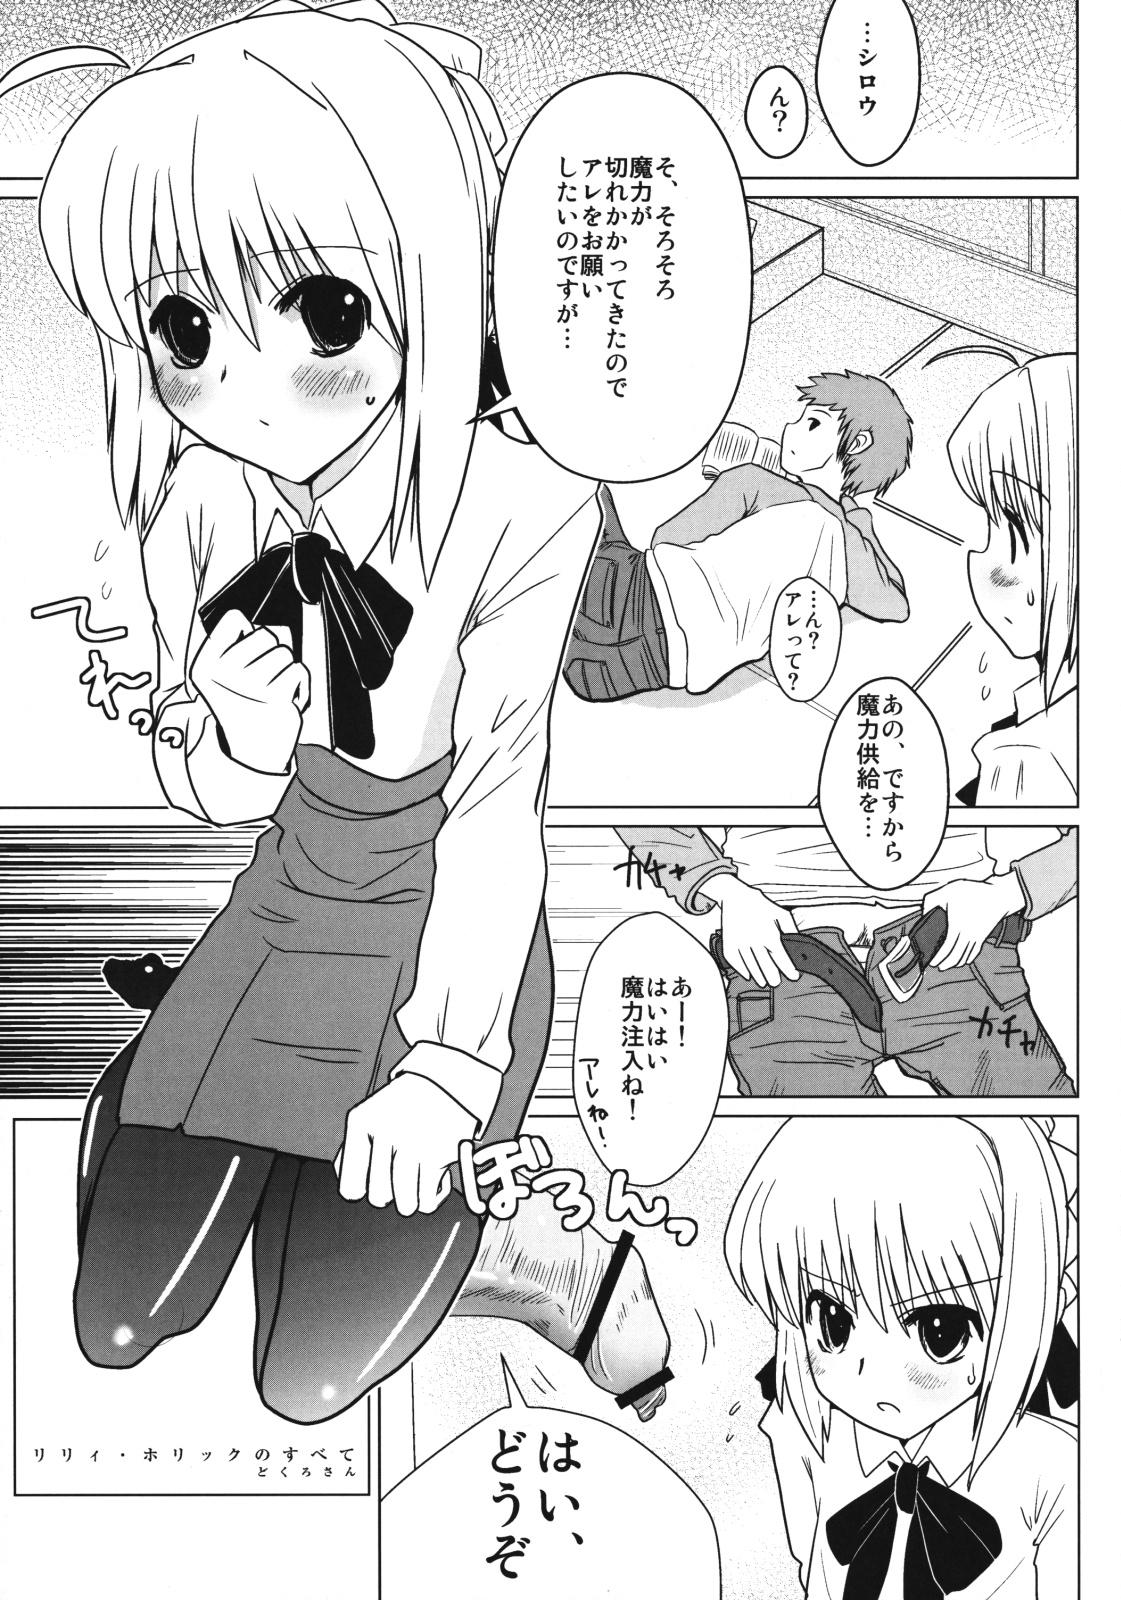 Adult Toys Lily Holic no Subete - Fate stay night Two - Page 4